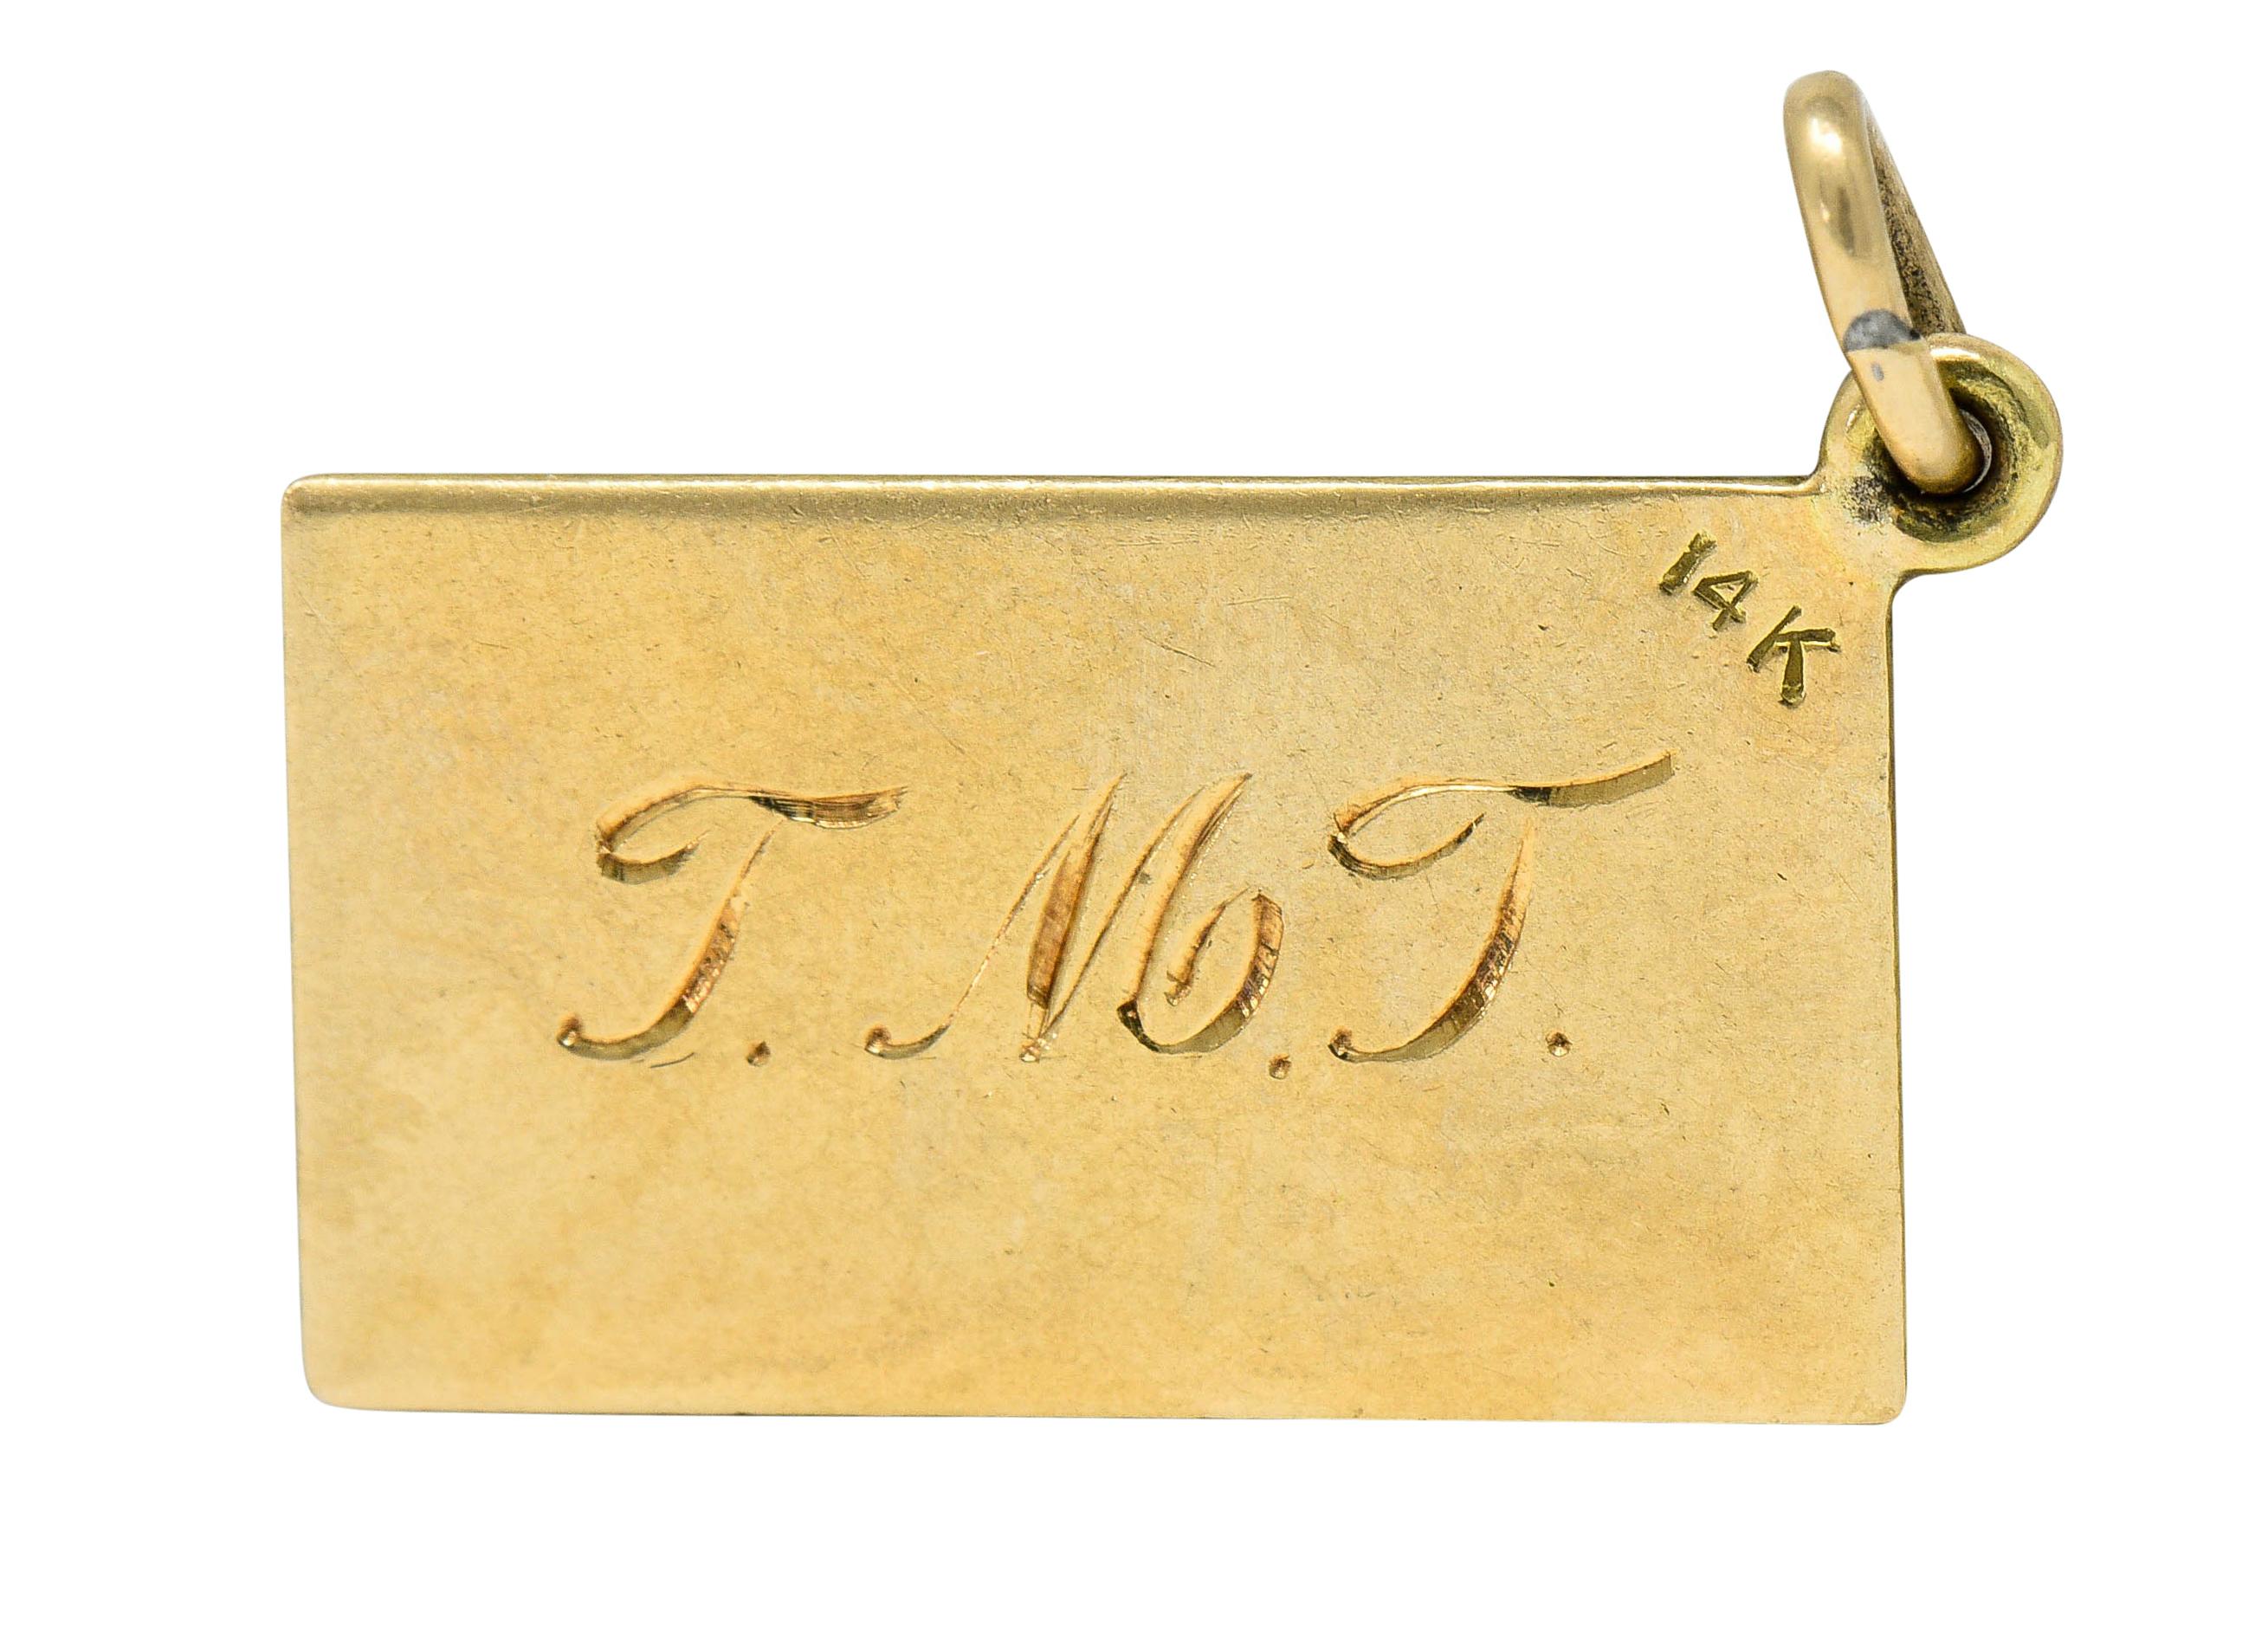 Rectangular charm is designed as a retro style postal card

With green enamel finely detailed as an address line and a one cent Jefferson stamp

Deeply engraved with a name and initials

Stamped 14K for 14 karat gold

Circa: 1940s

Measures: 7/16 x